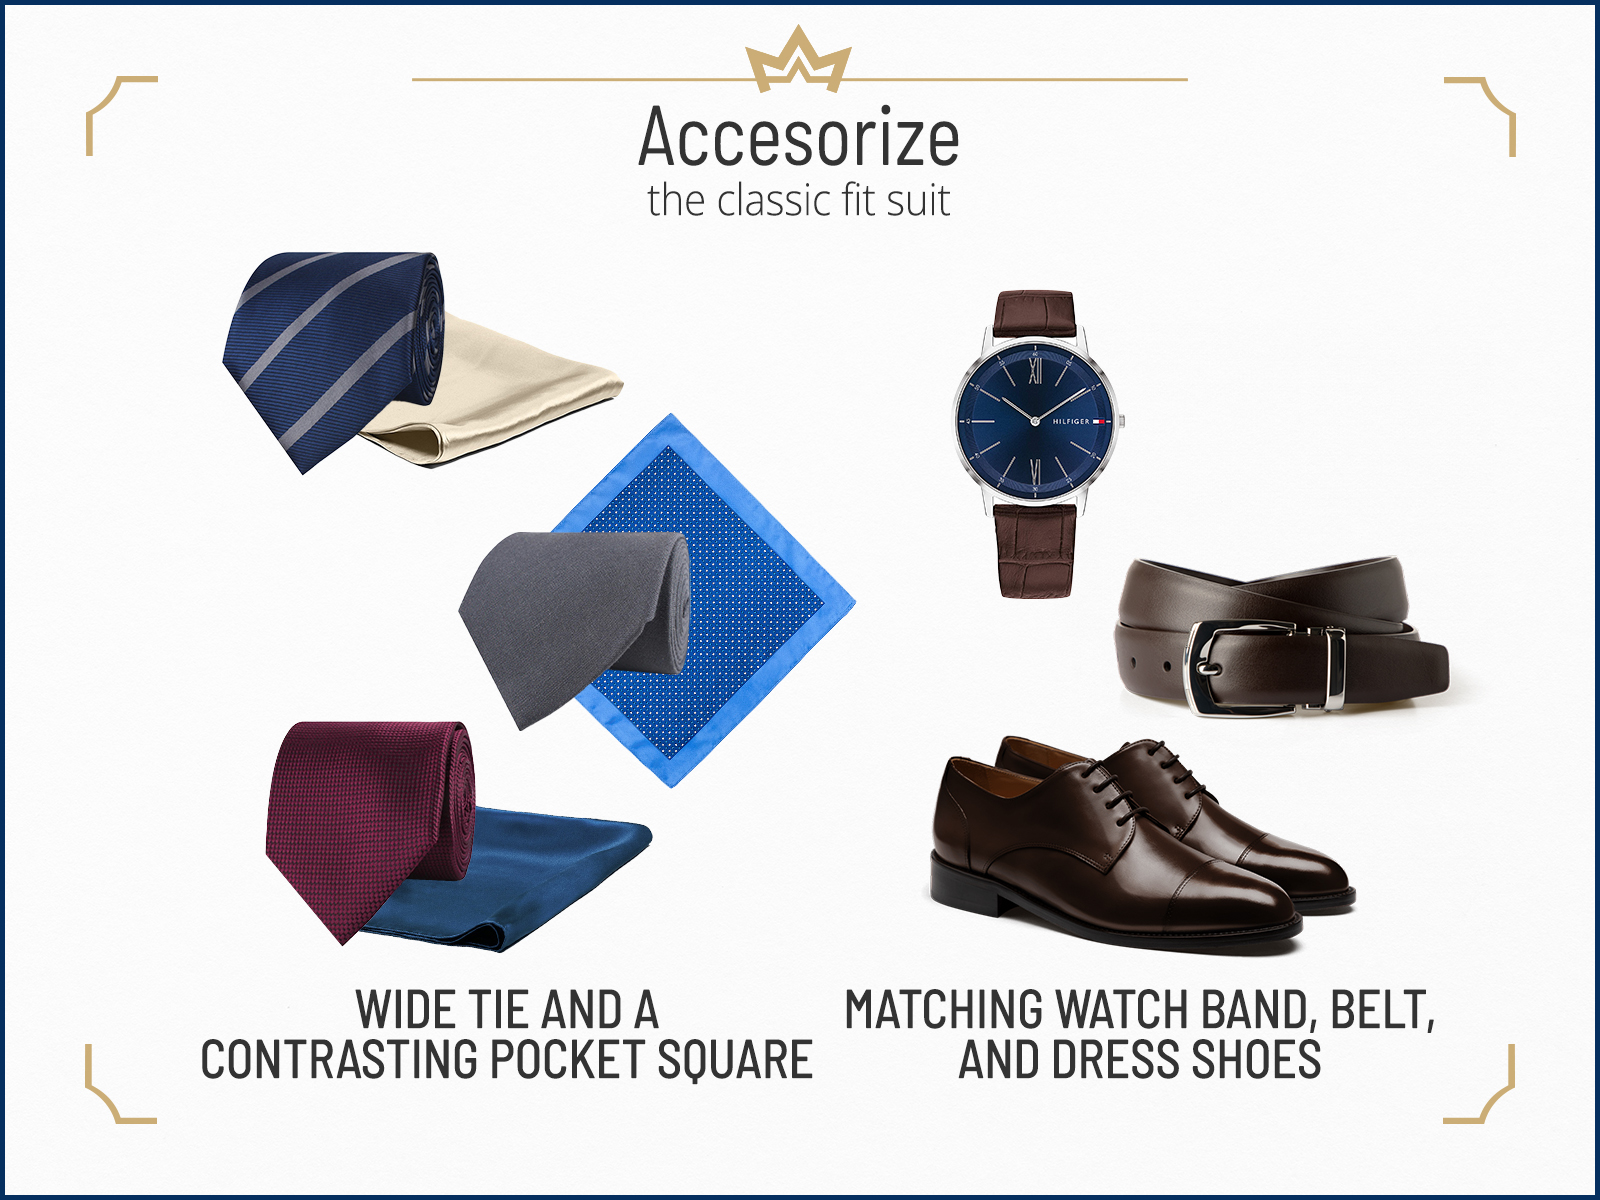 Standard accessories for the classic fit suit